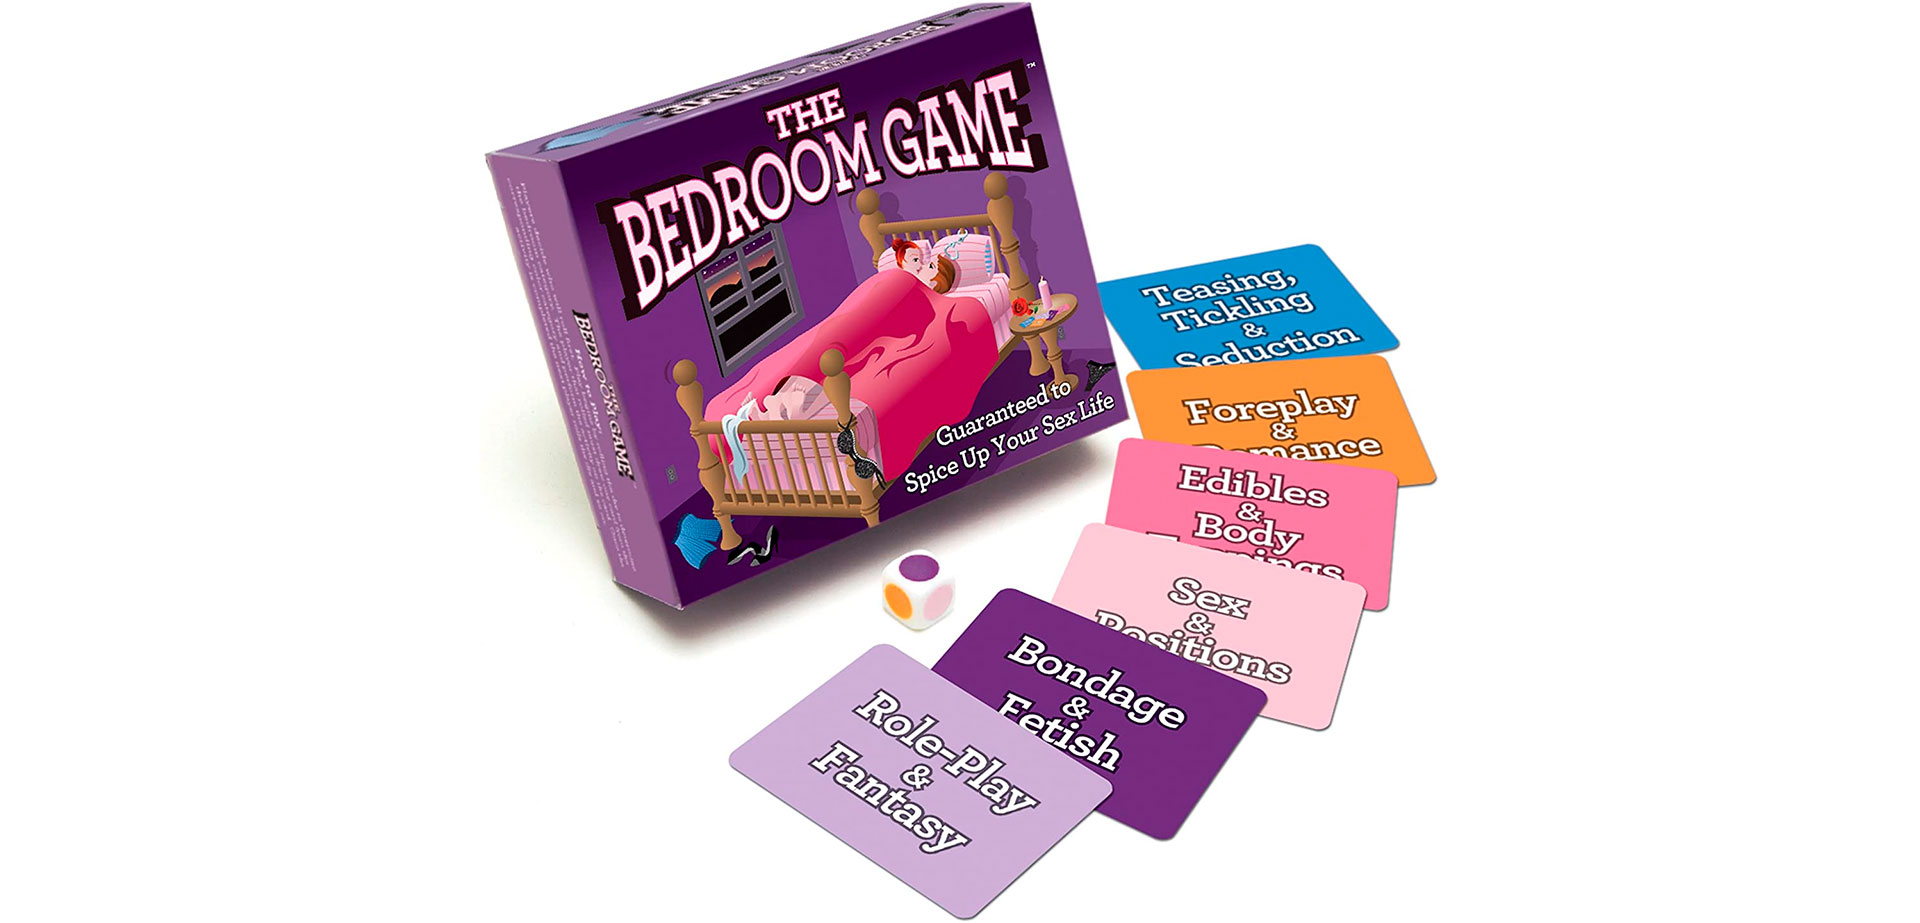 Exciting Sex Game for Couples.